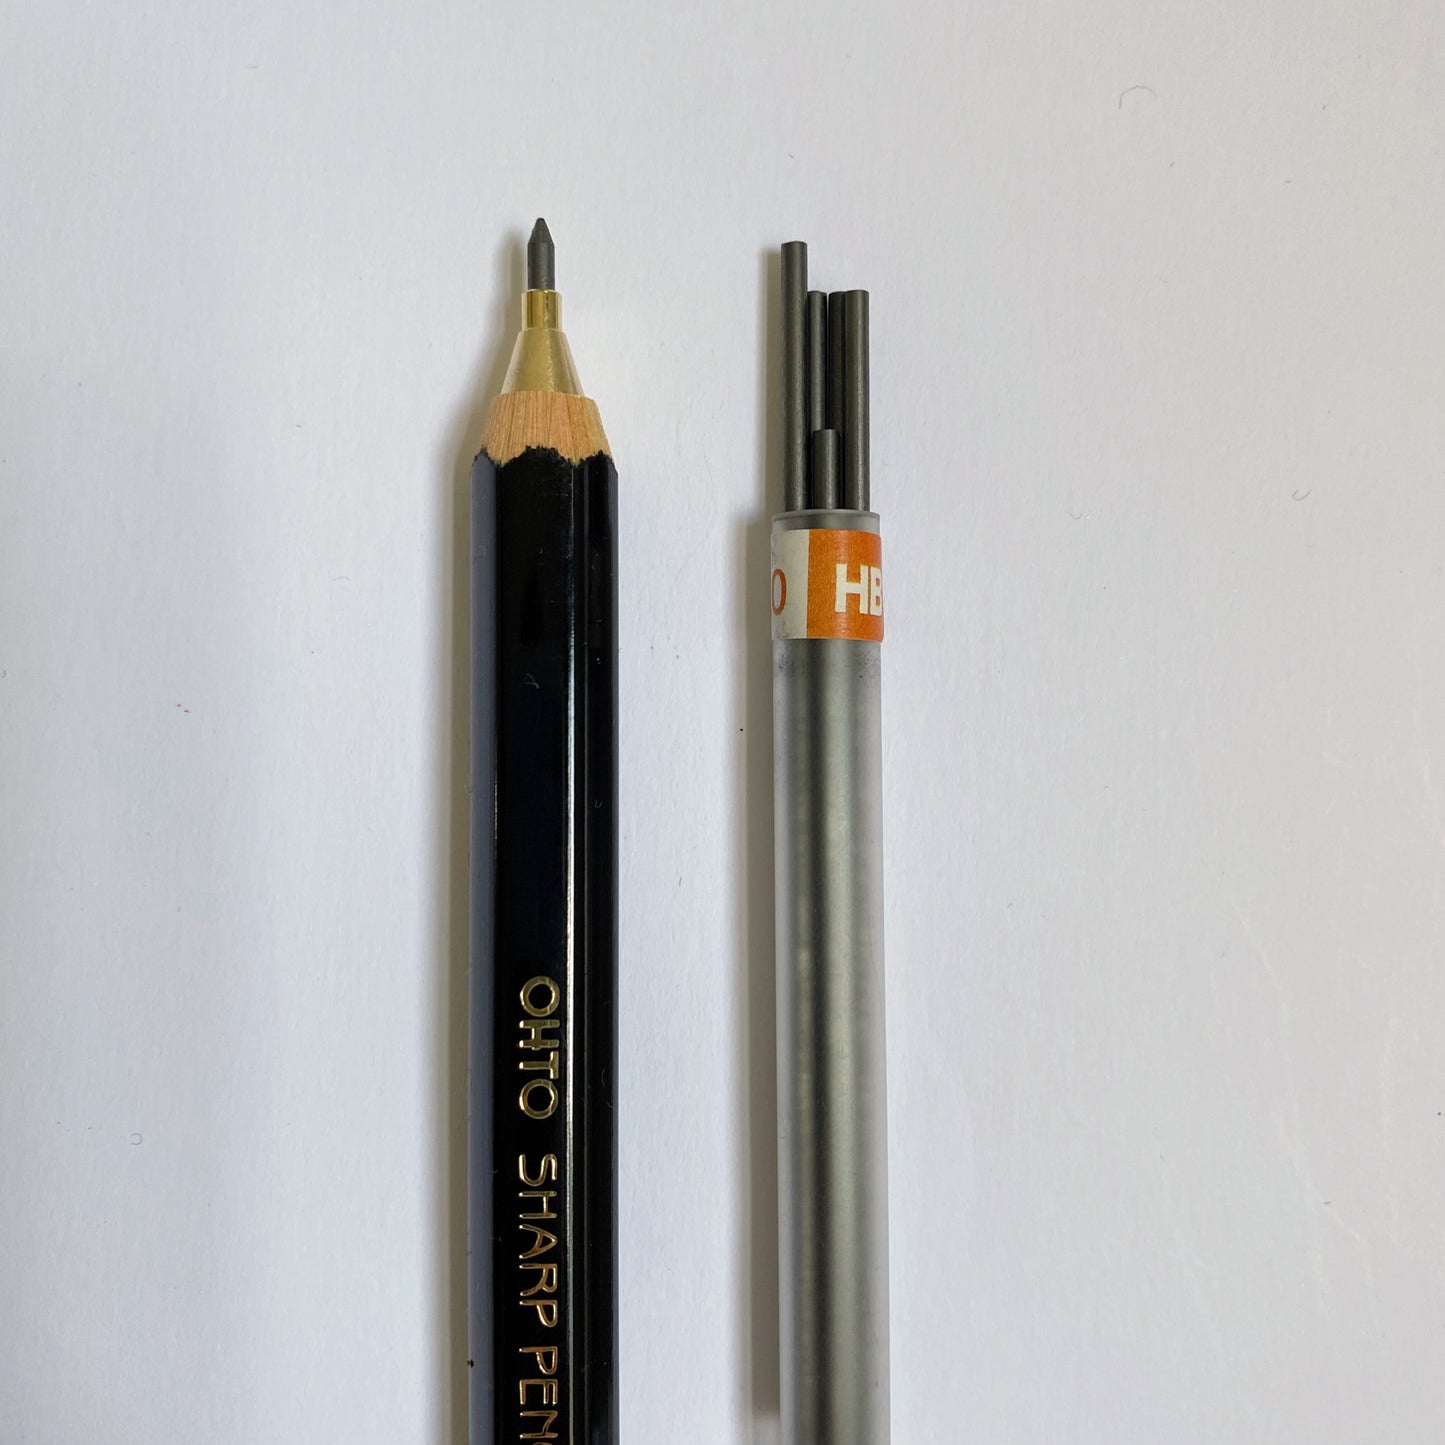 ohto : wooden mechanical pencil